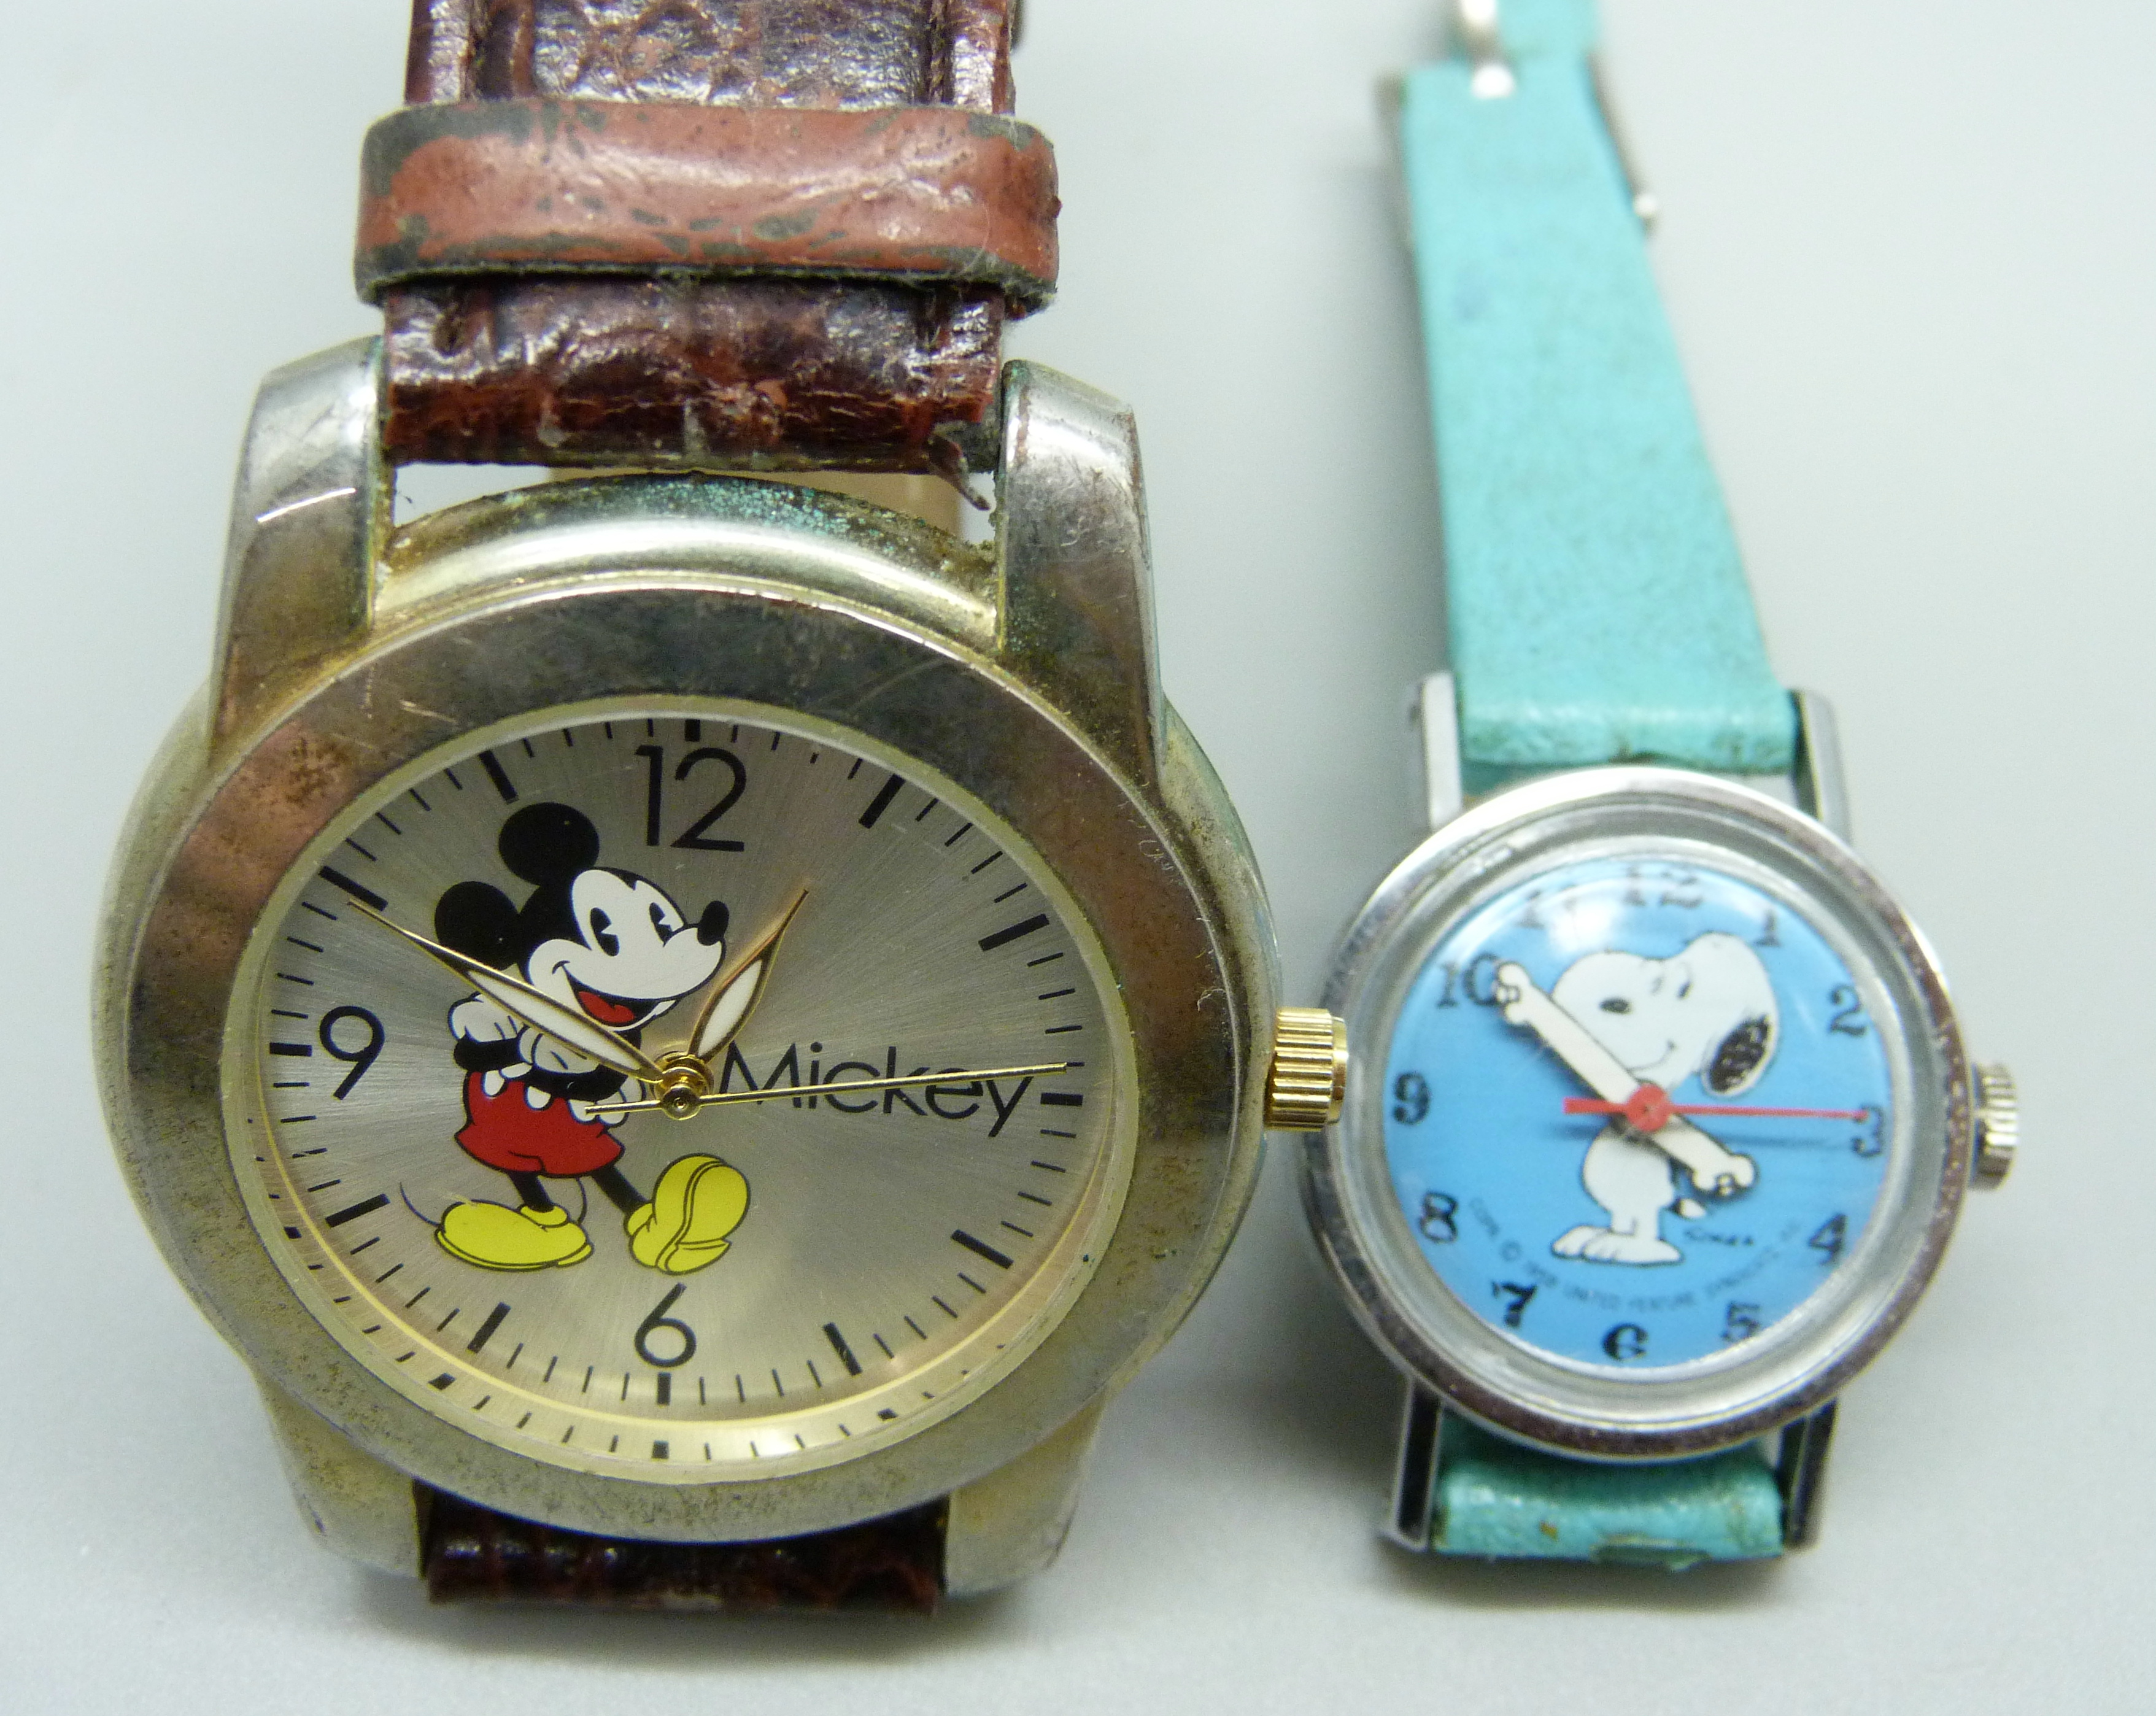 A Disney Mickey Mouse watch and a Snoopy watch